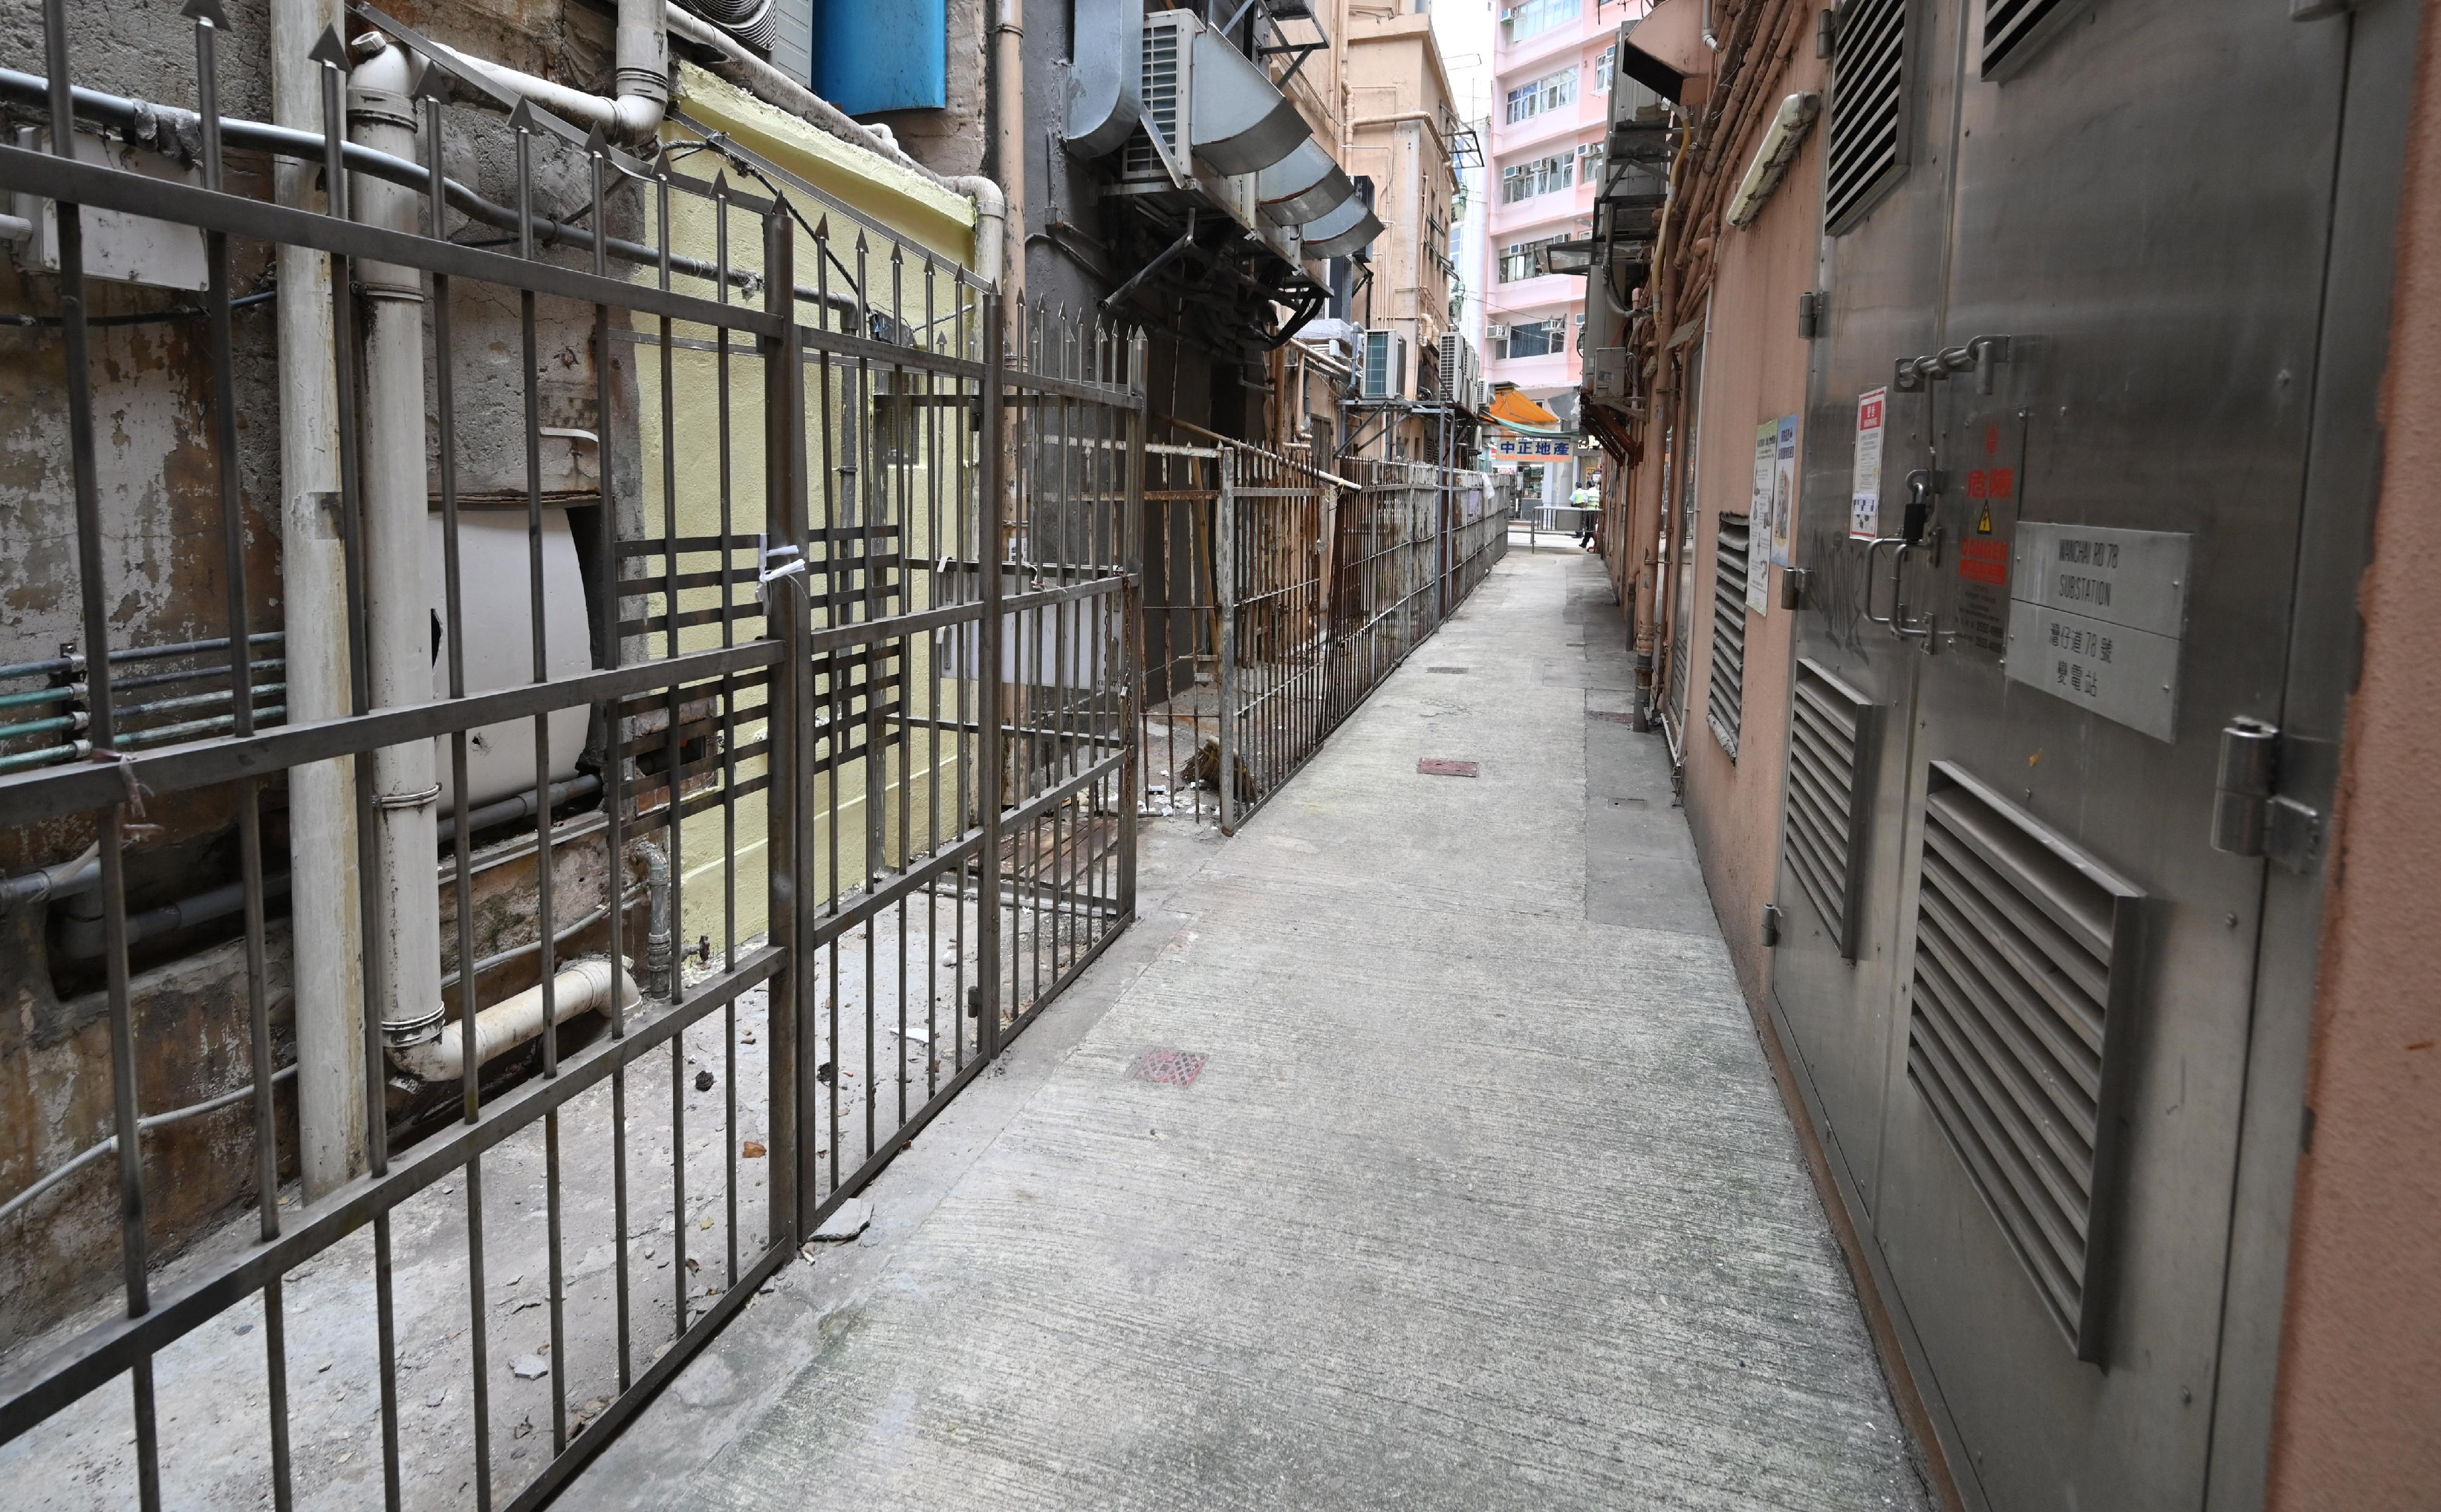 A spokesman for the Food and Environmental Hygiene Department (FEHD) said today (October 24) that the FEHD and the Hong Kong Police Force have conducted a series of stringent enforcement actions against illegal shop front extension activities in various districts since October 3. Photo shows the condition of an area in Wan Chai District after a joint operation.